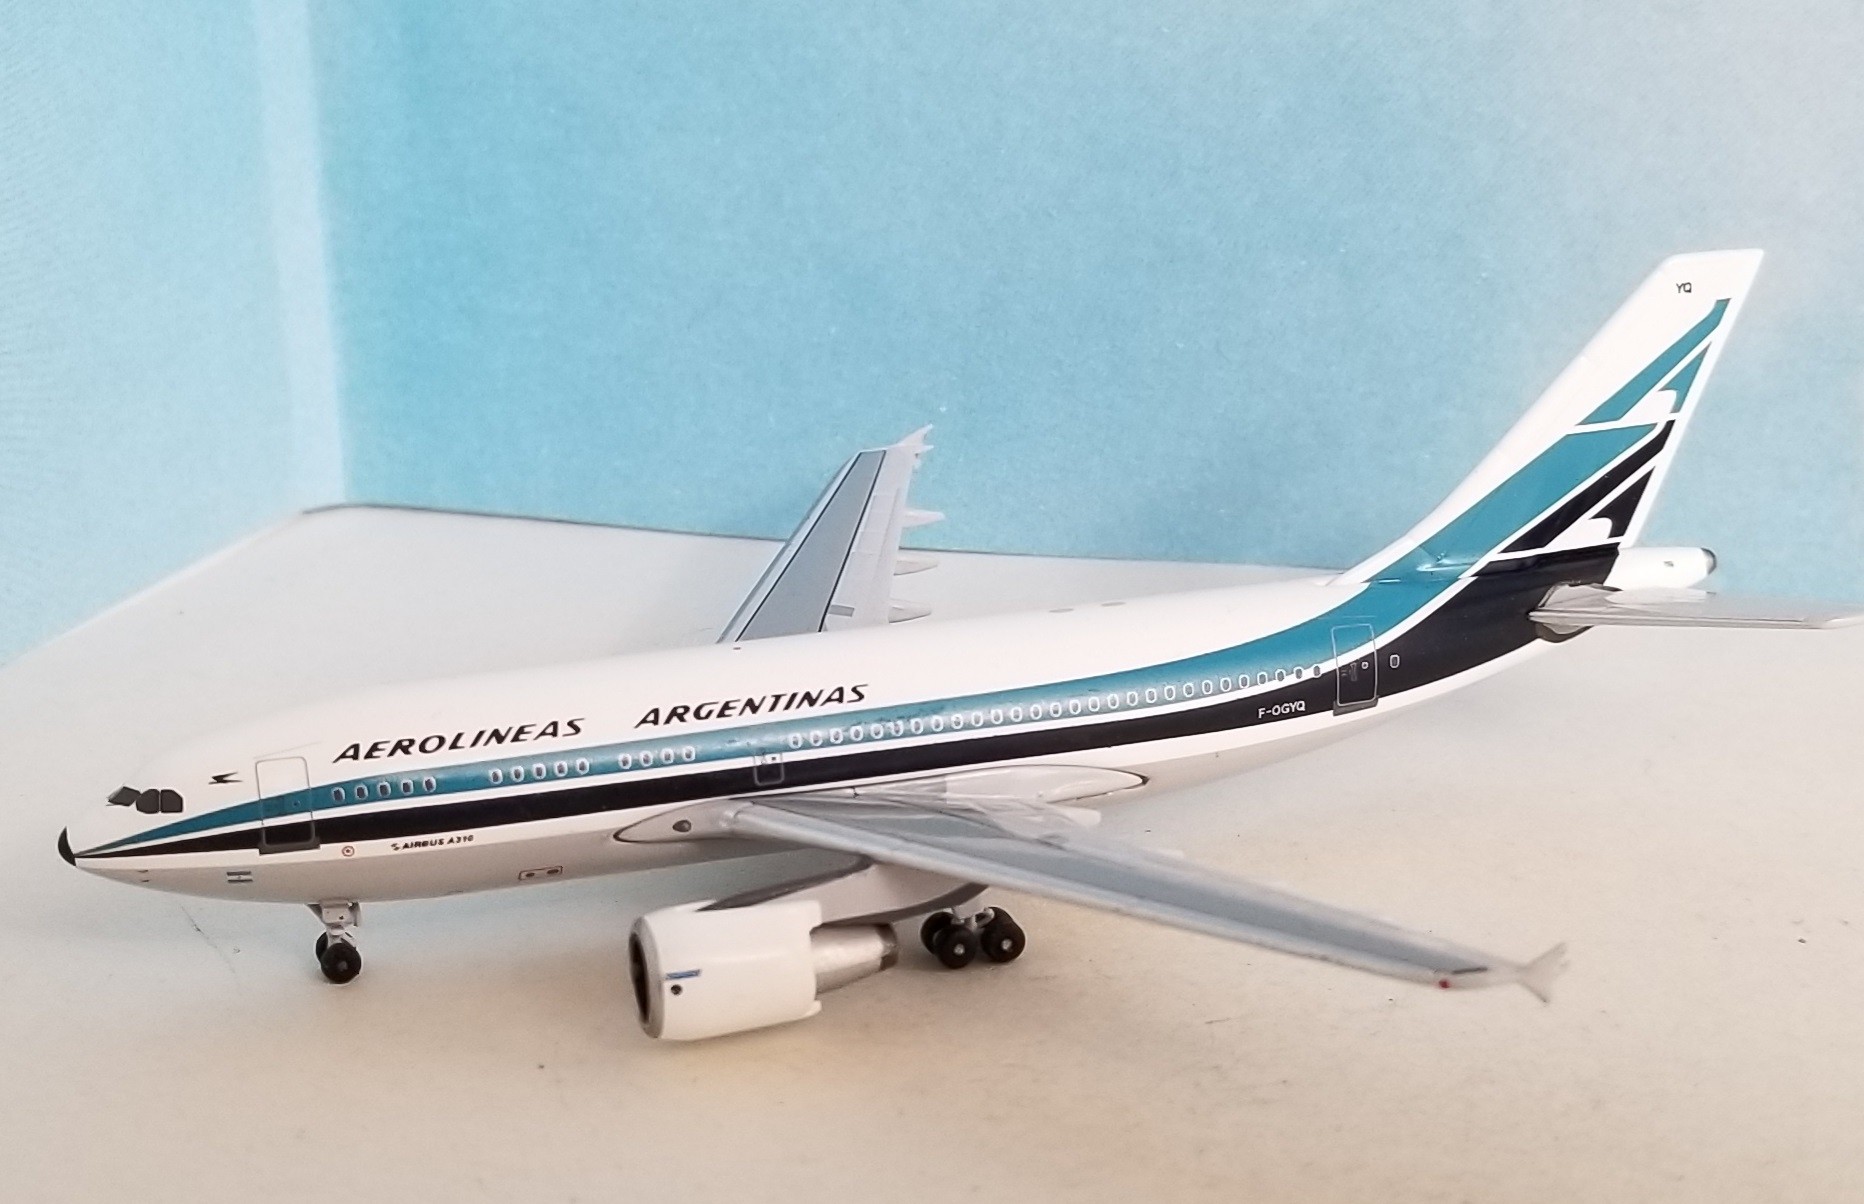 RARE Aeroclassics 1 400 CONTINENTAL Airlines Airbus A300 N13983 for sale online